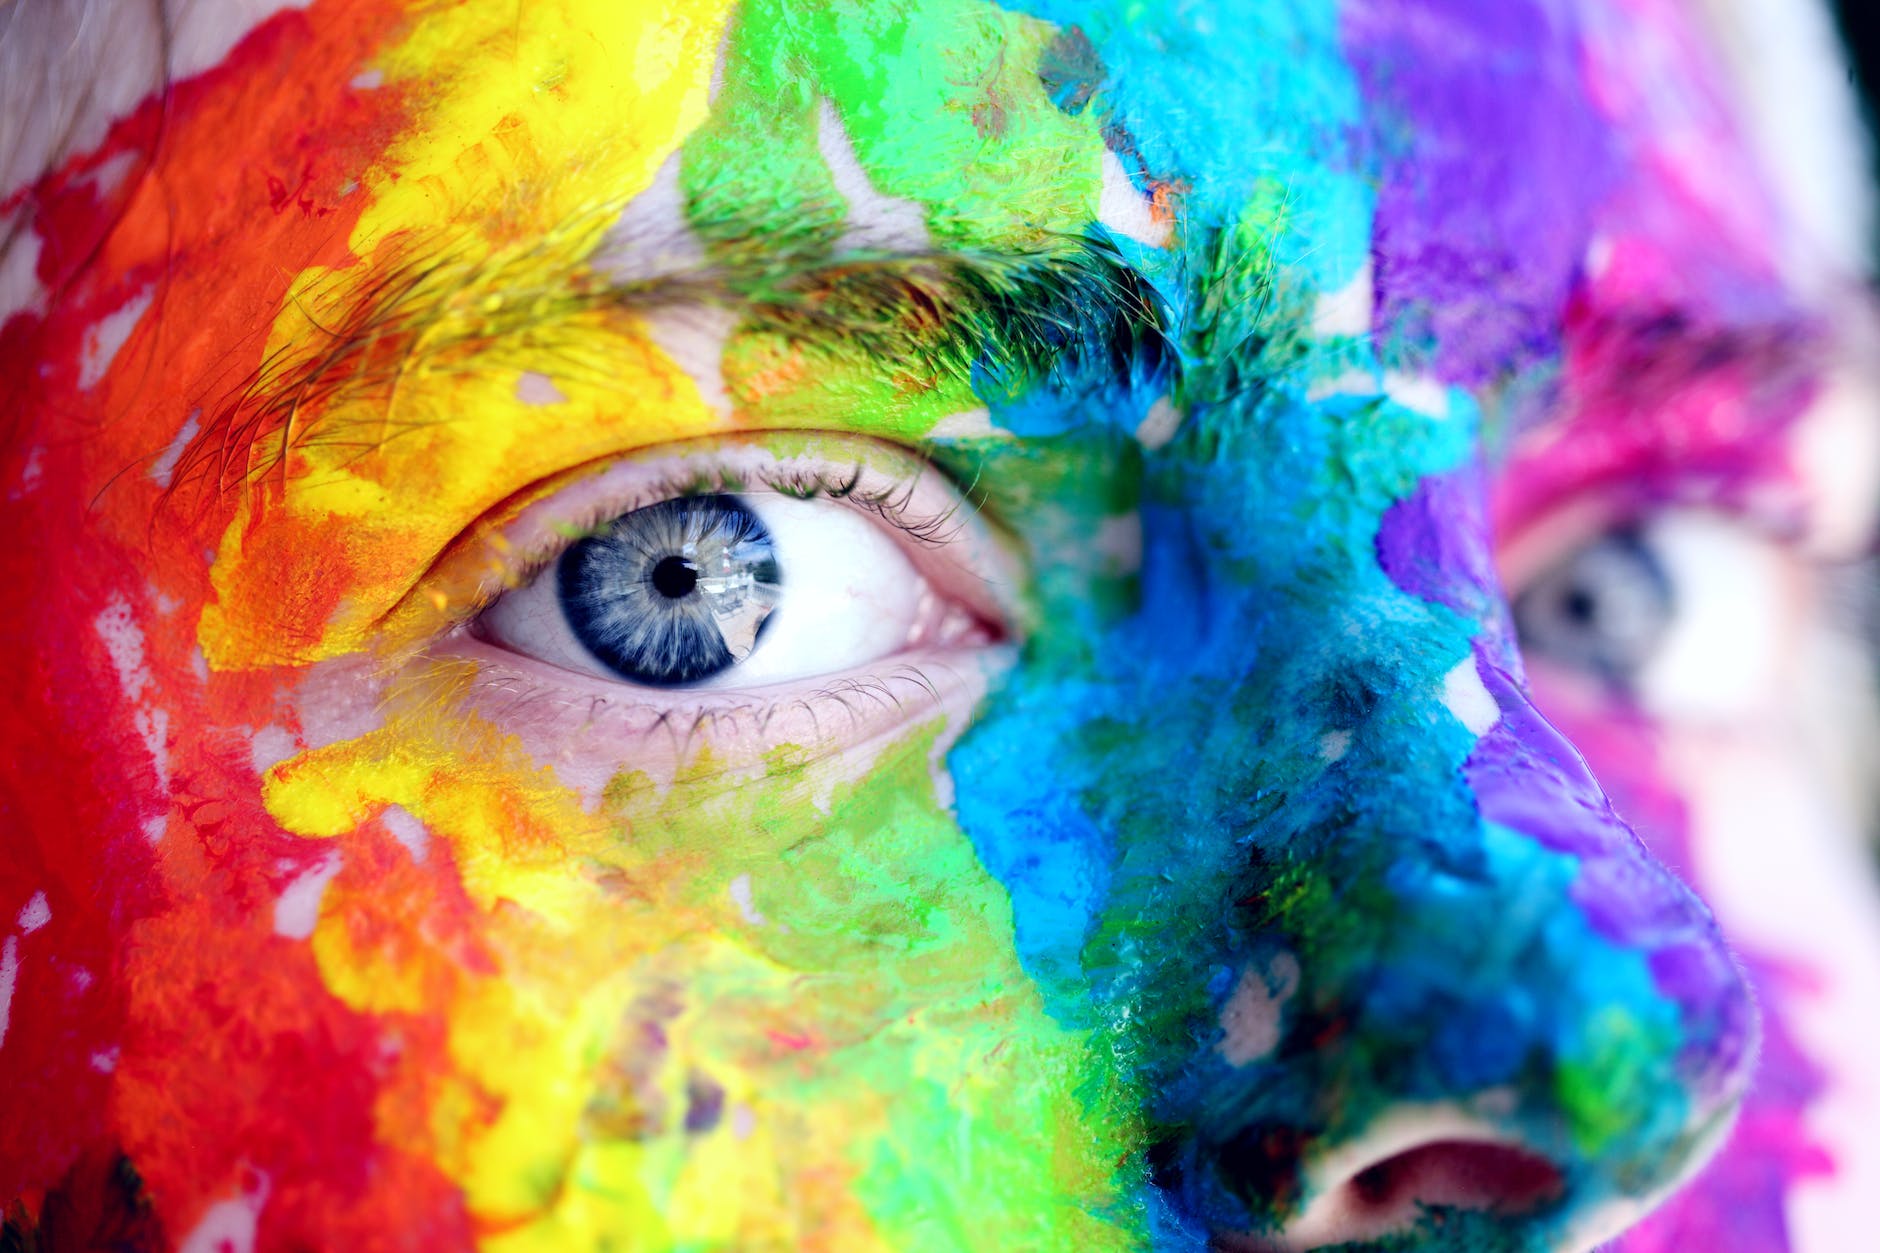 Colorful face, symbolizing the diverse emotional impacts of different hues on human psychology.